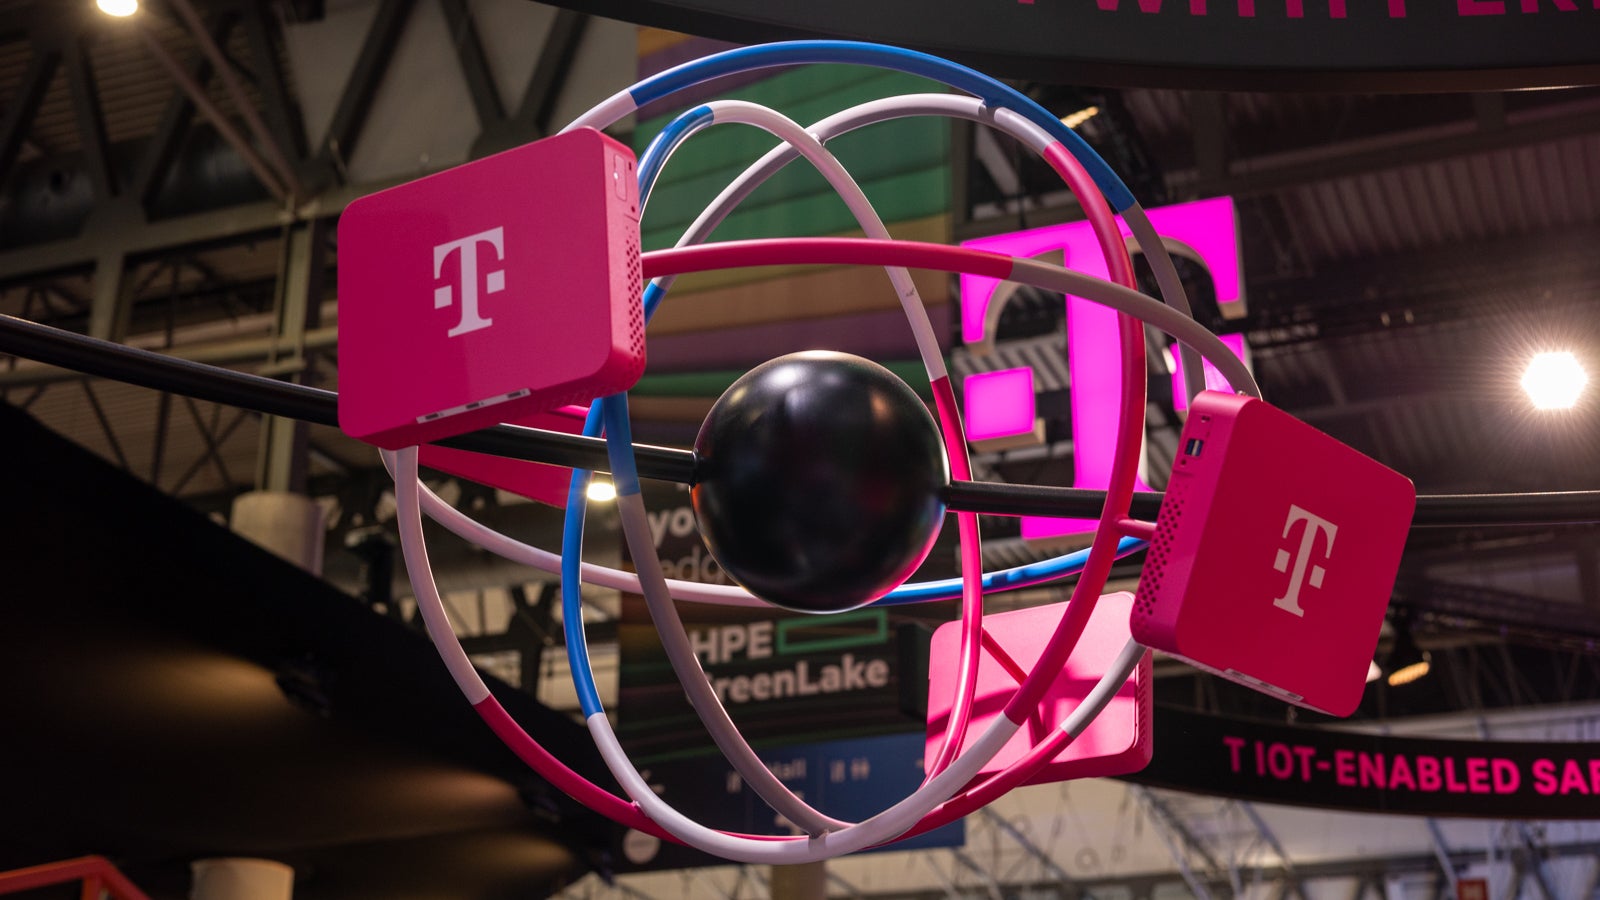 T Mobiles latest promotion is aimed at 5G Internet switchers